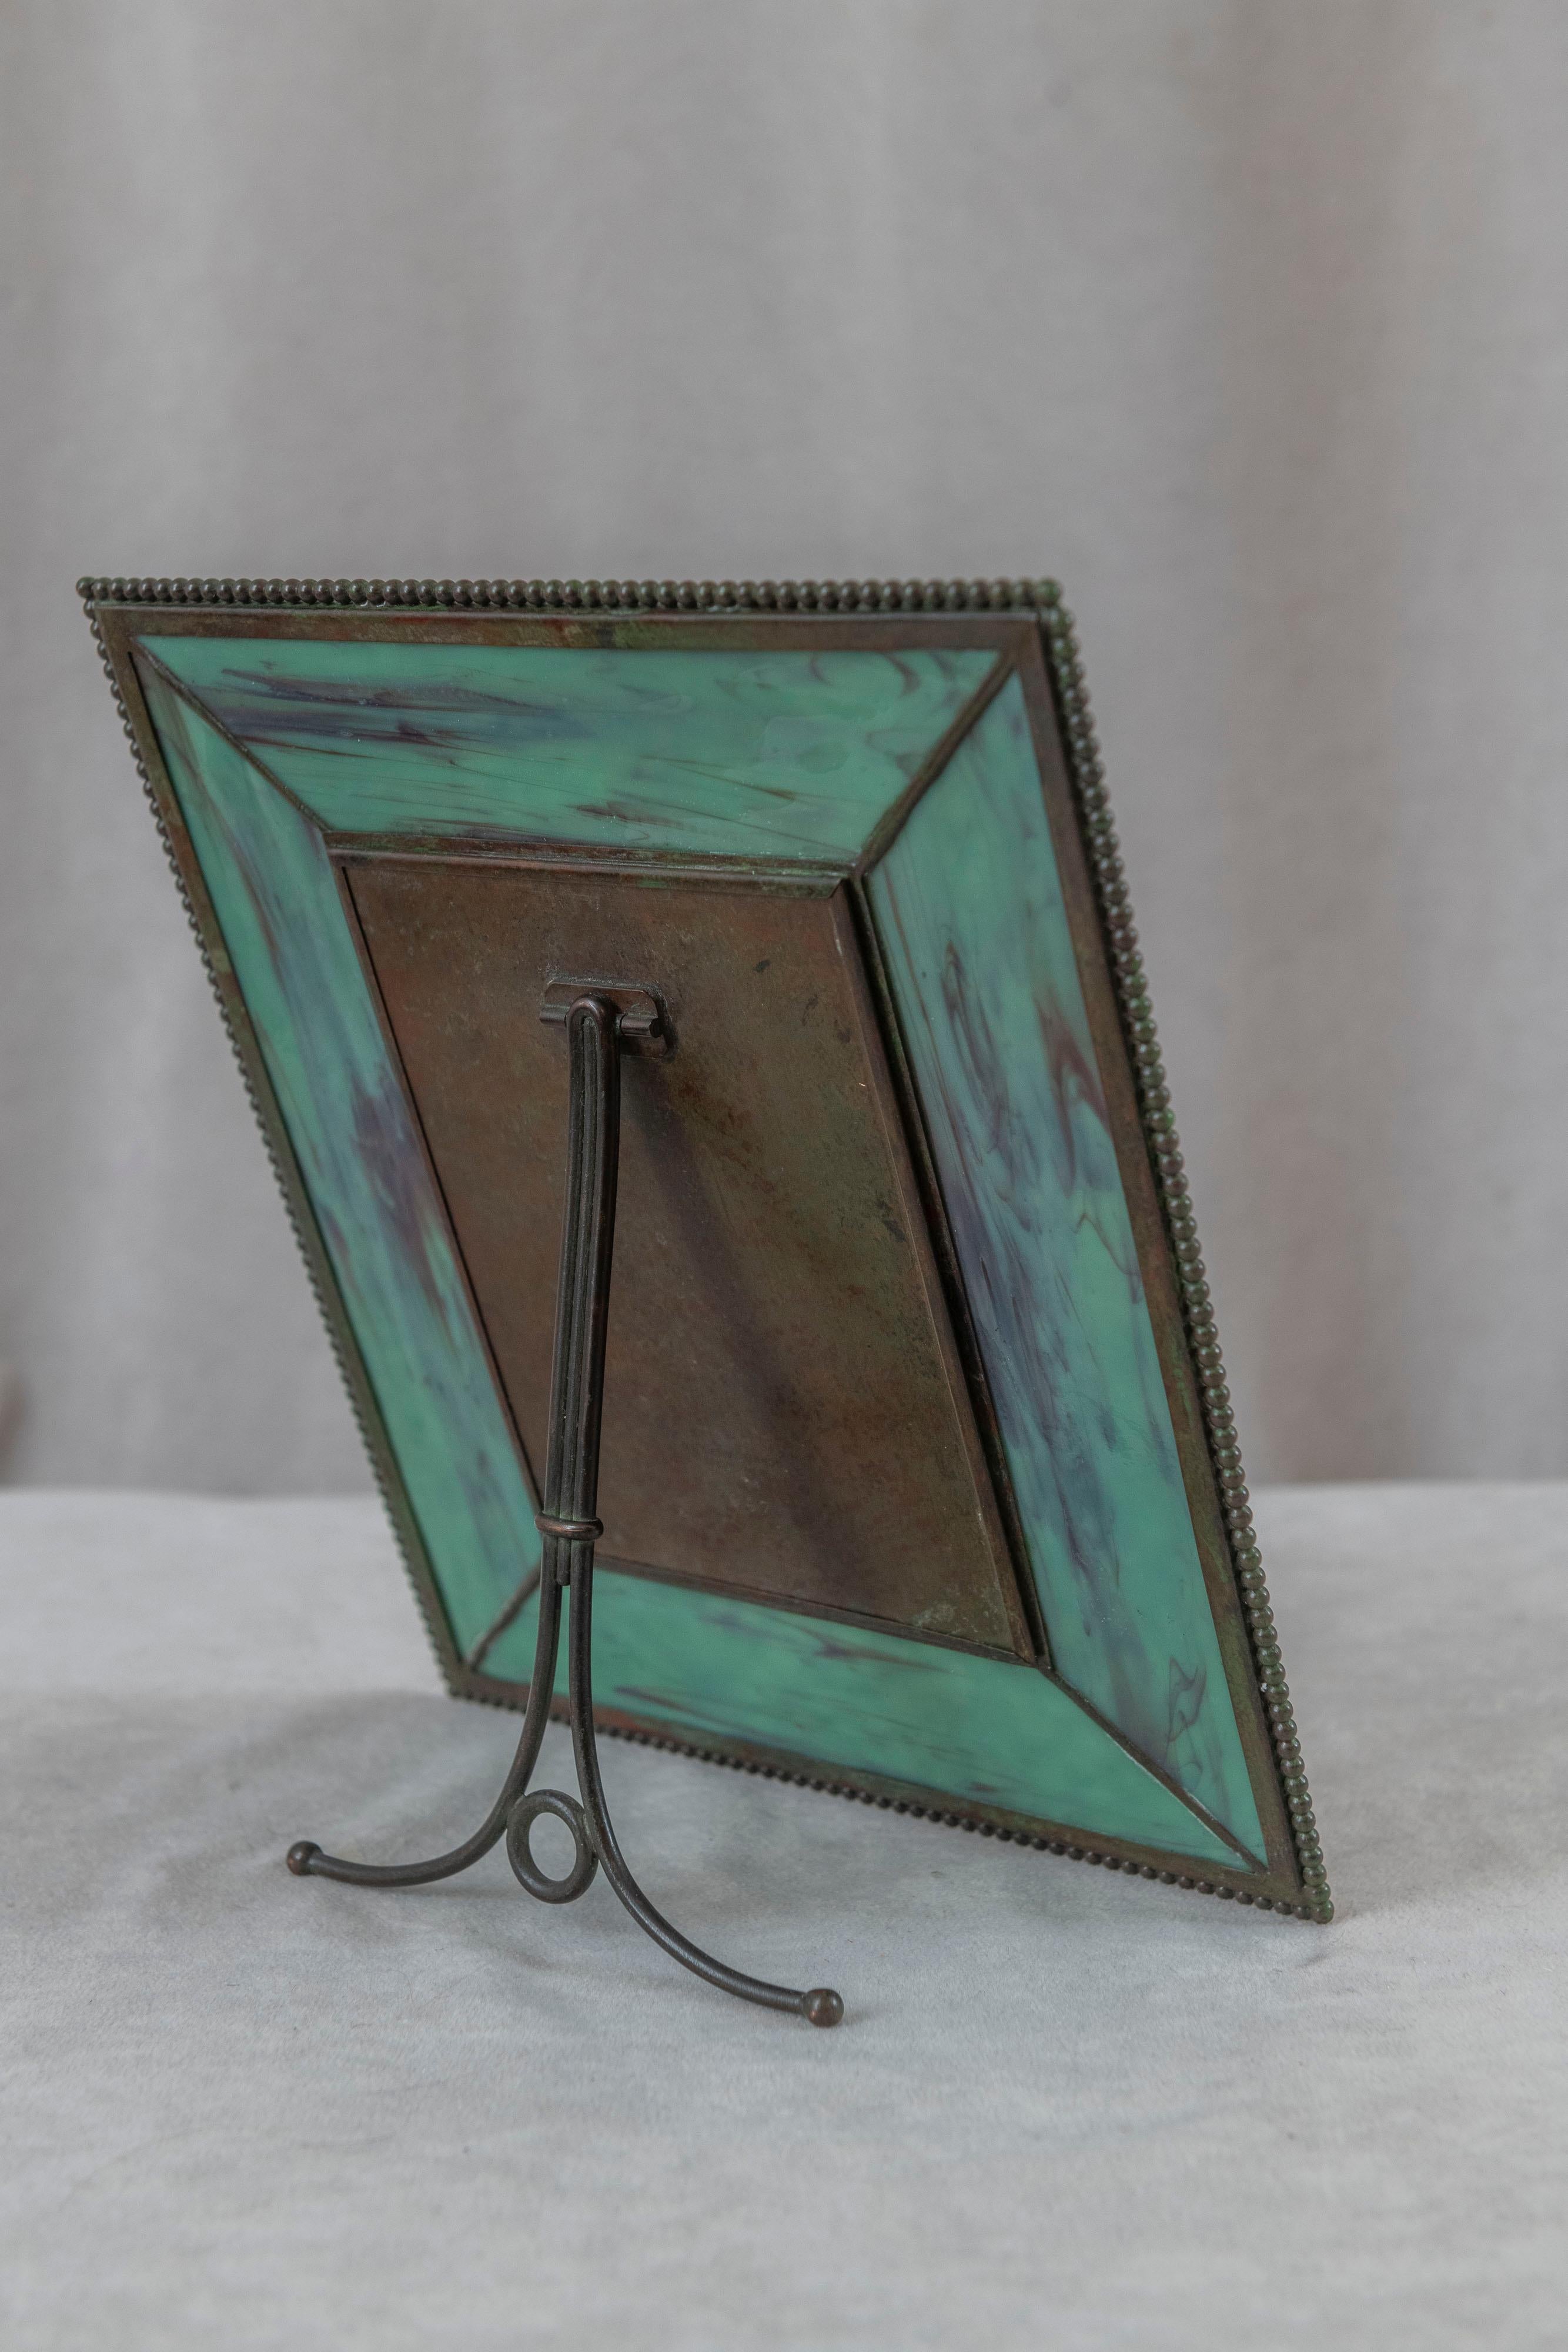 Hand-Crafted Antique Picture Frame, Signed Tiffany Studios, Pine Needle Design, ca. 1905